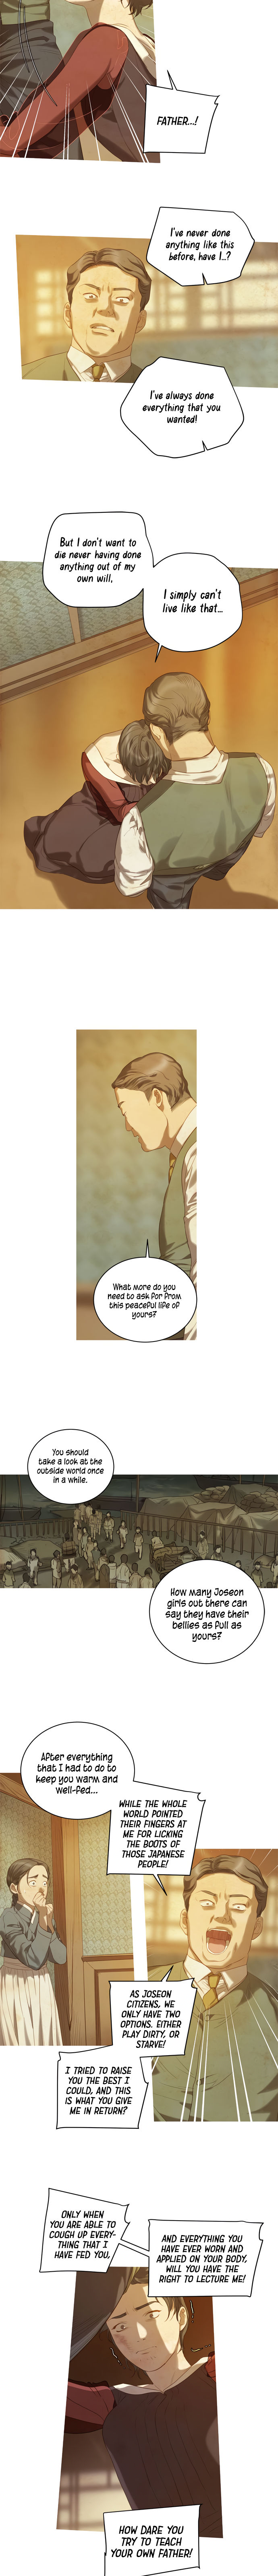 The Whale Star - The Gyeongseong Mermaid - Chapter 13 Page 4